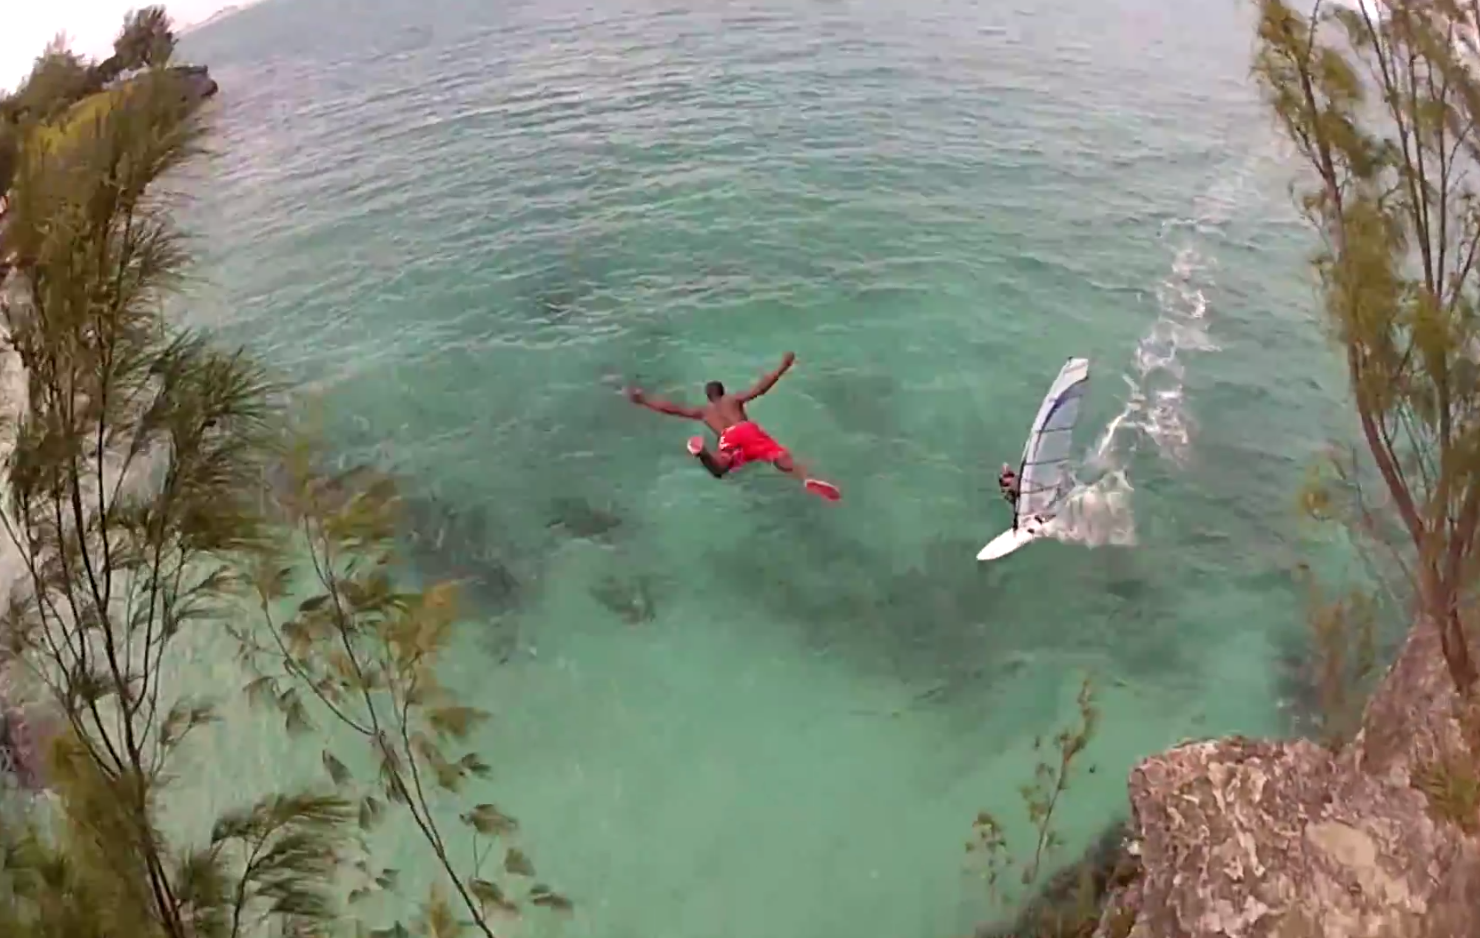 Watch: Cliff Diver Nearly Collide With Windsurfer | Unofficial Networks